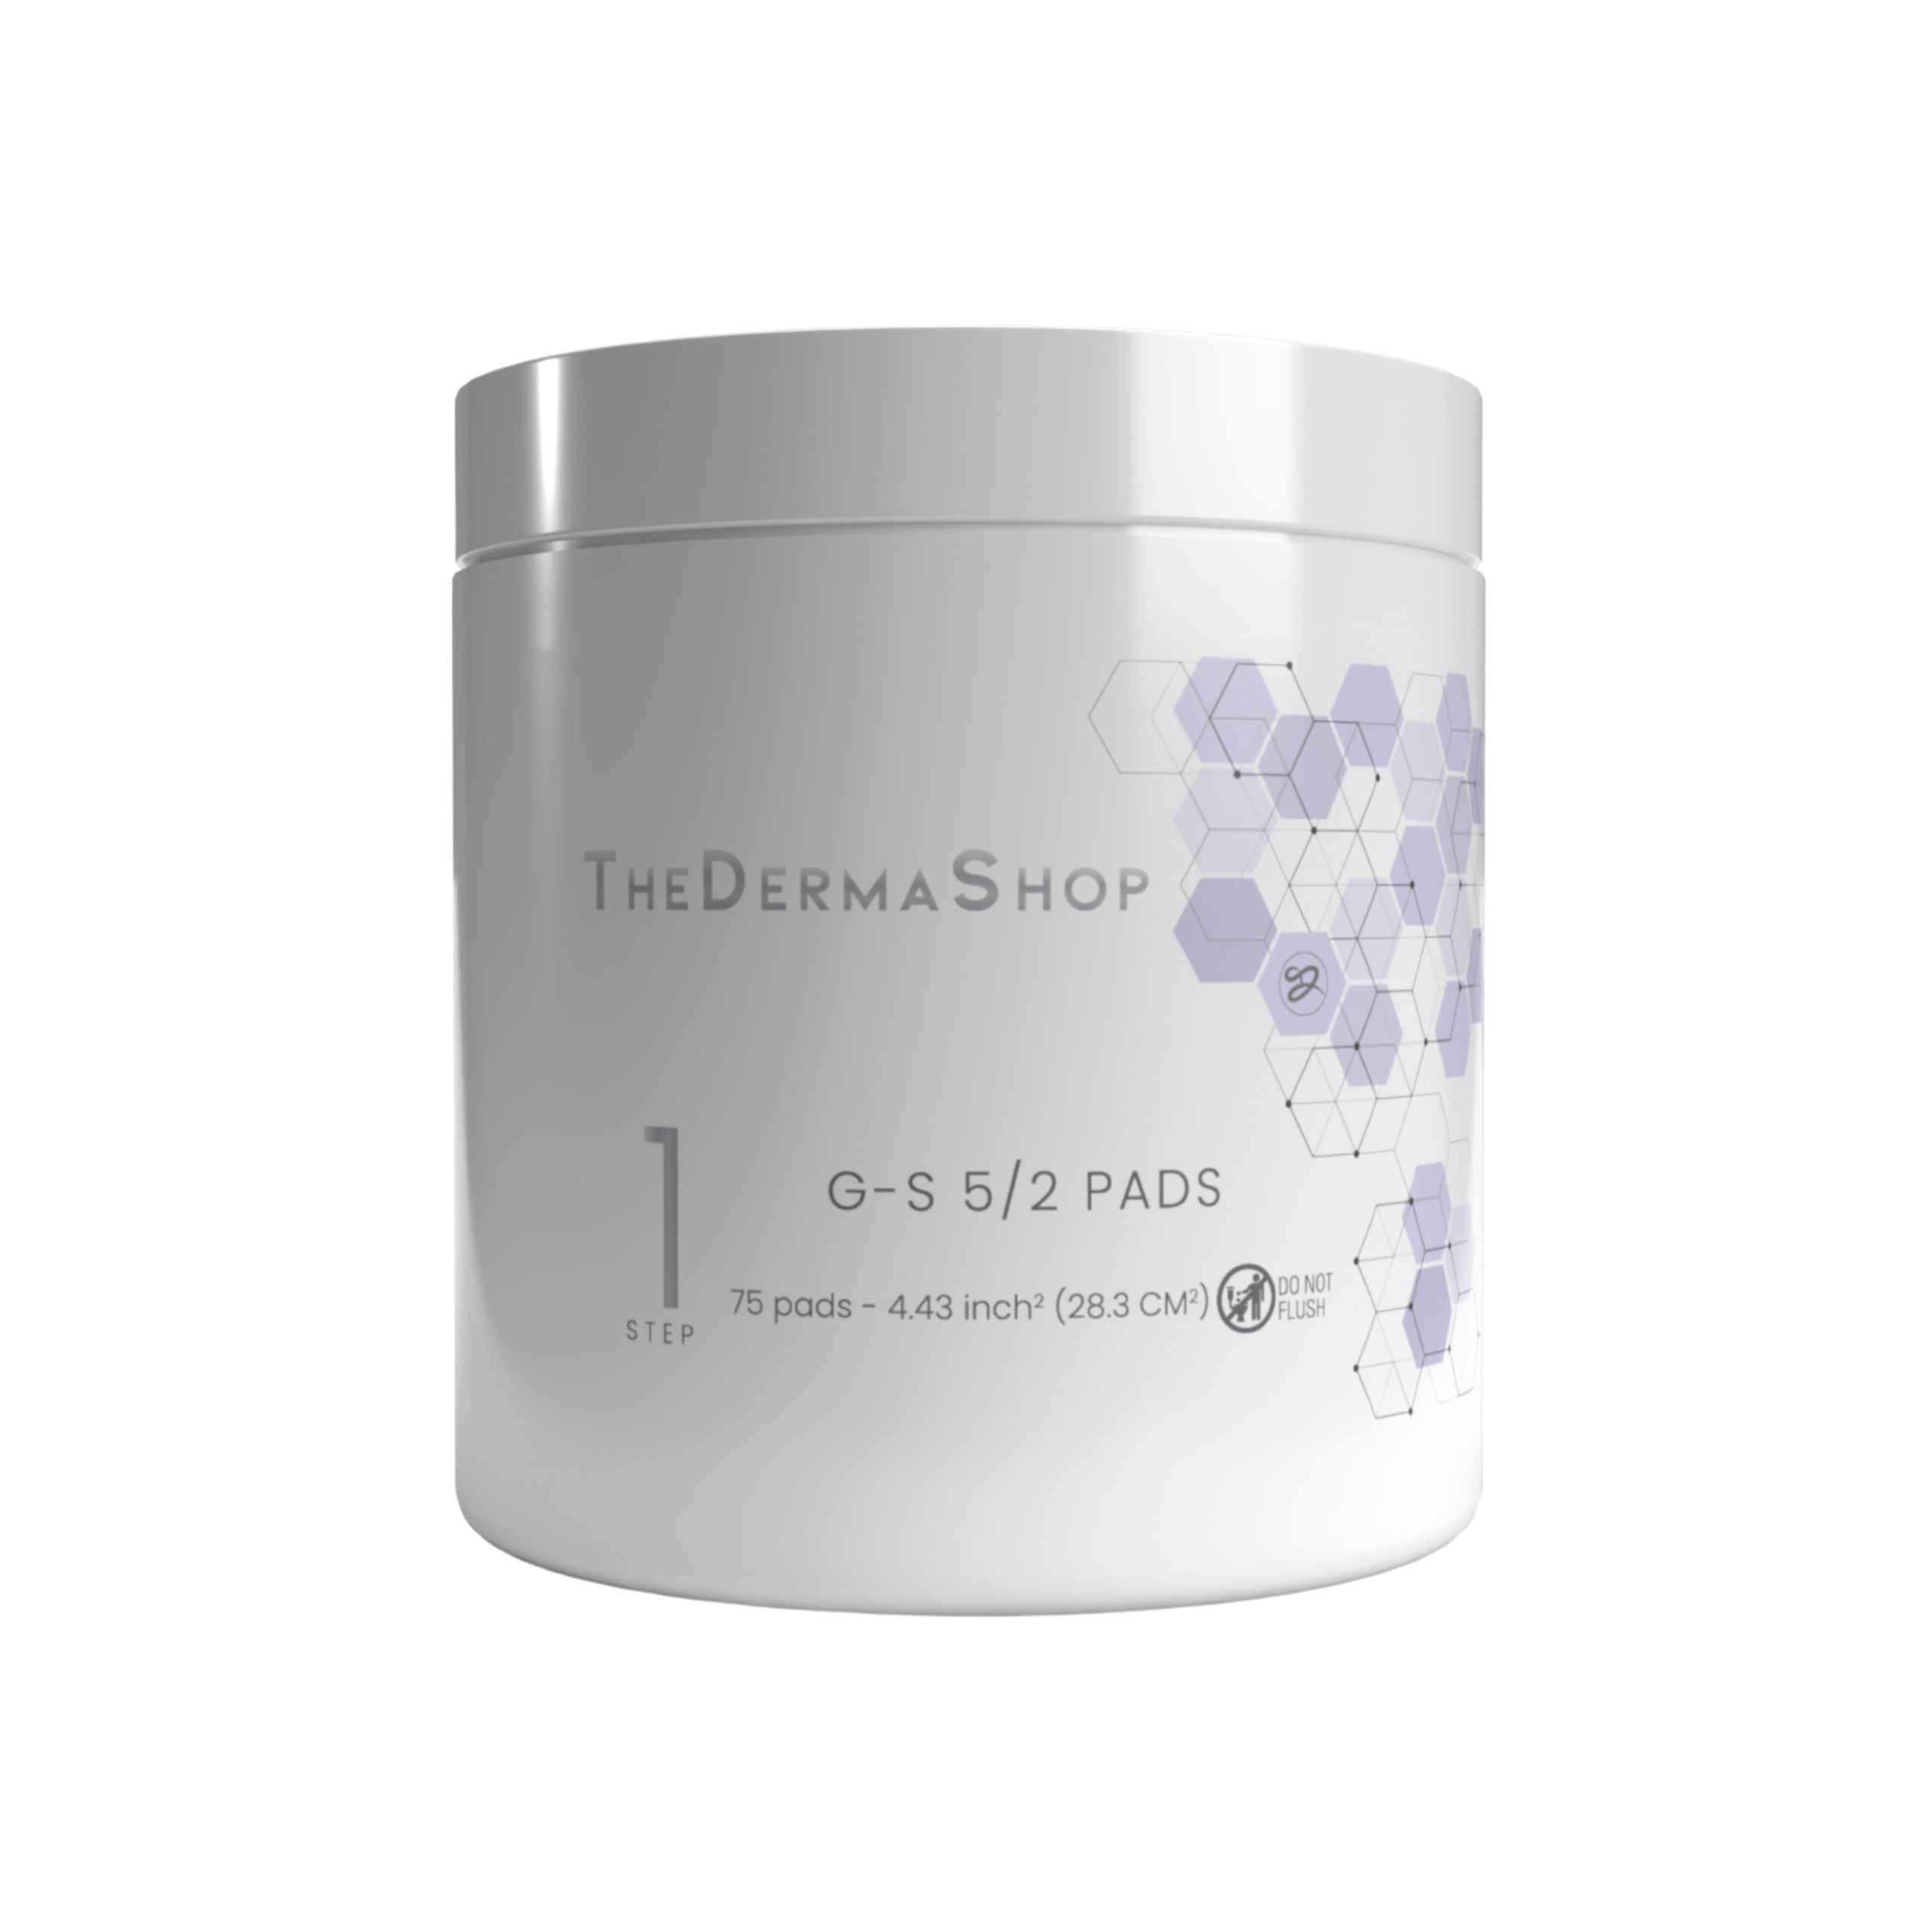 TheDermaShop G-S 5/2 Pads